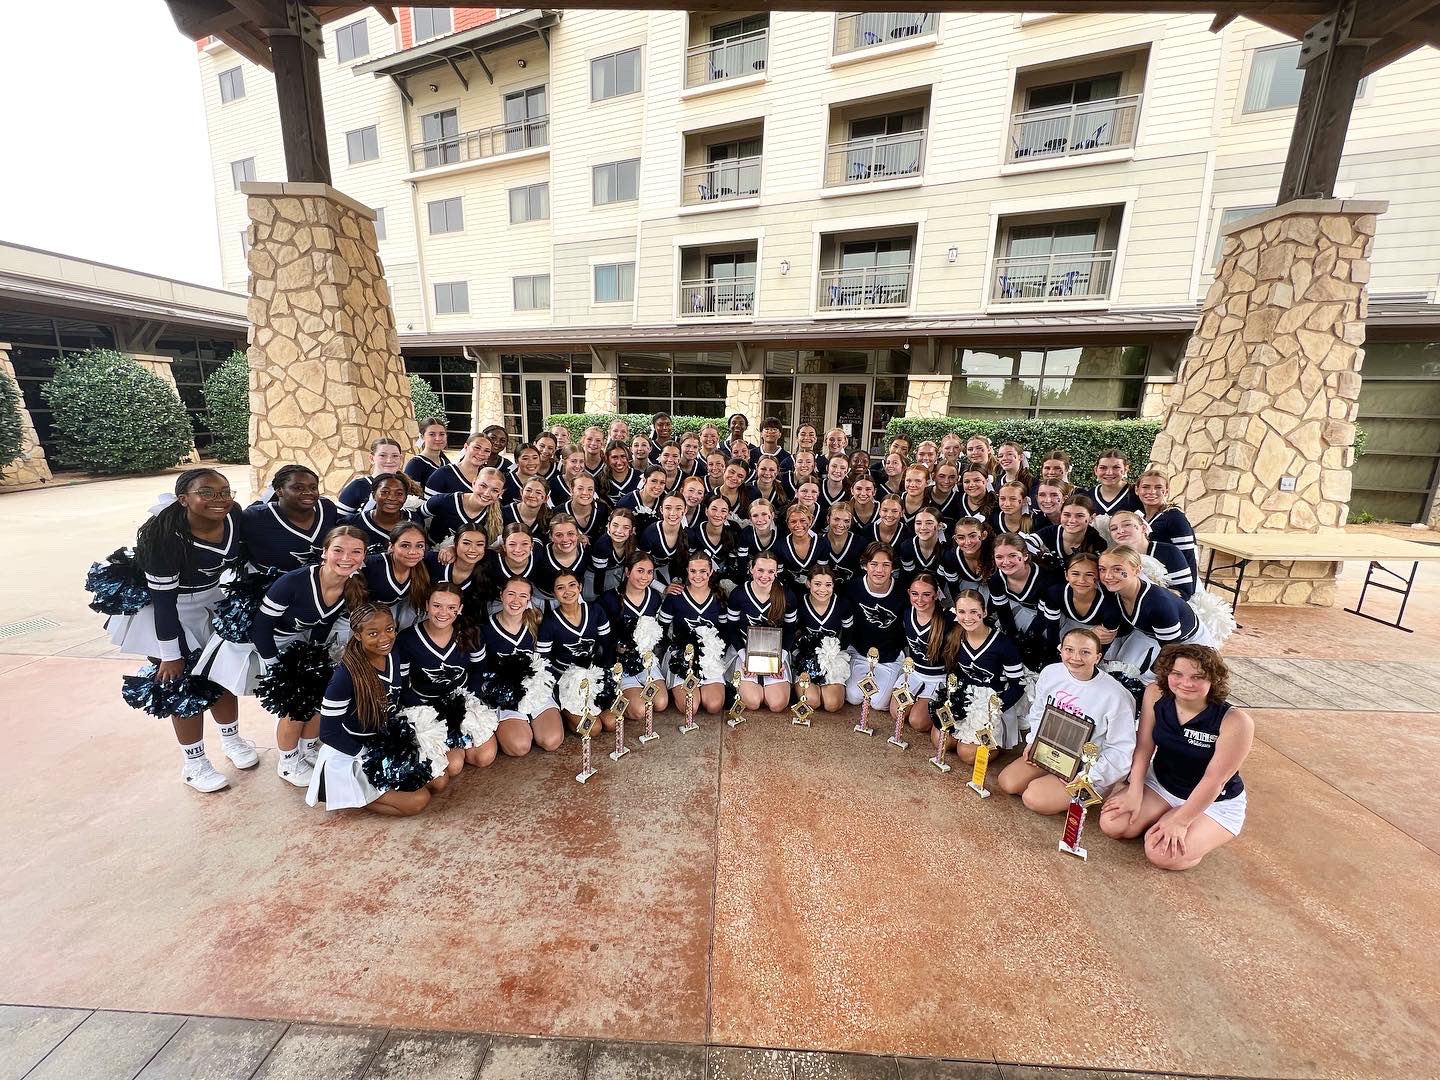 Tomball Memorial HS Cheer Takes Home Overall Leadership Award from UCA Cheer Camp